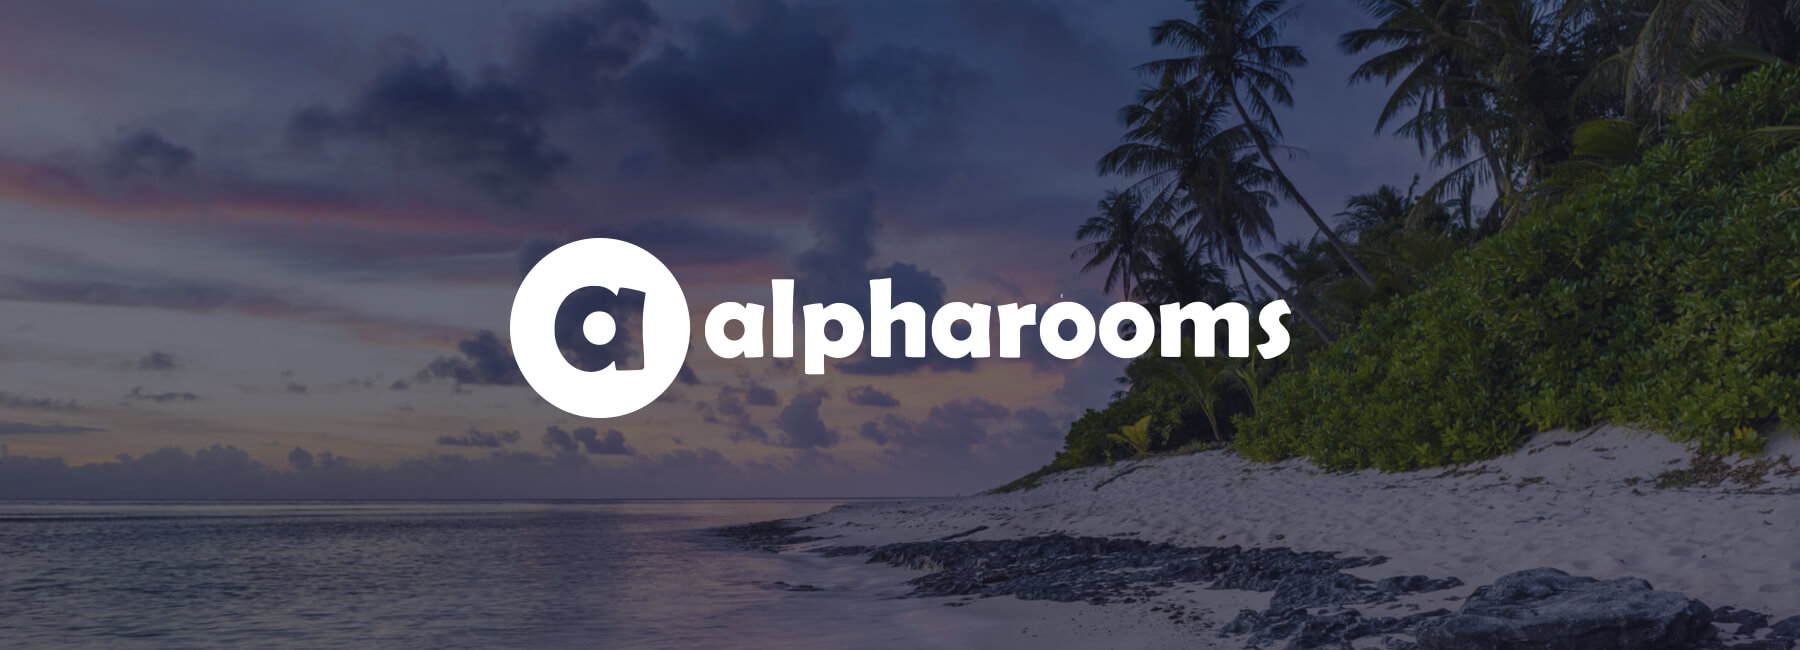 Alpharooms uses feedback to aid in customer experience initiatives